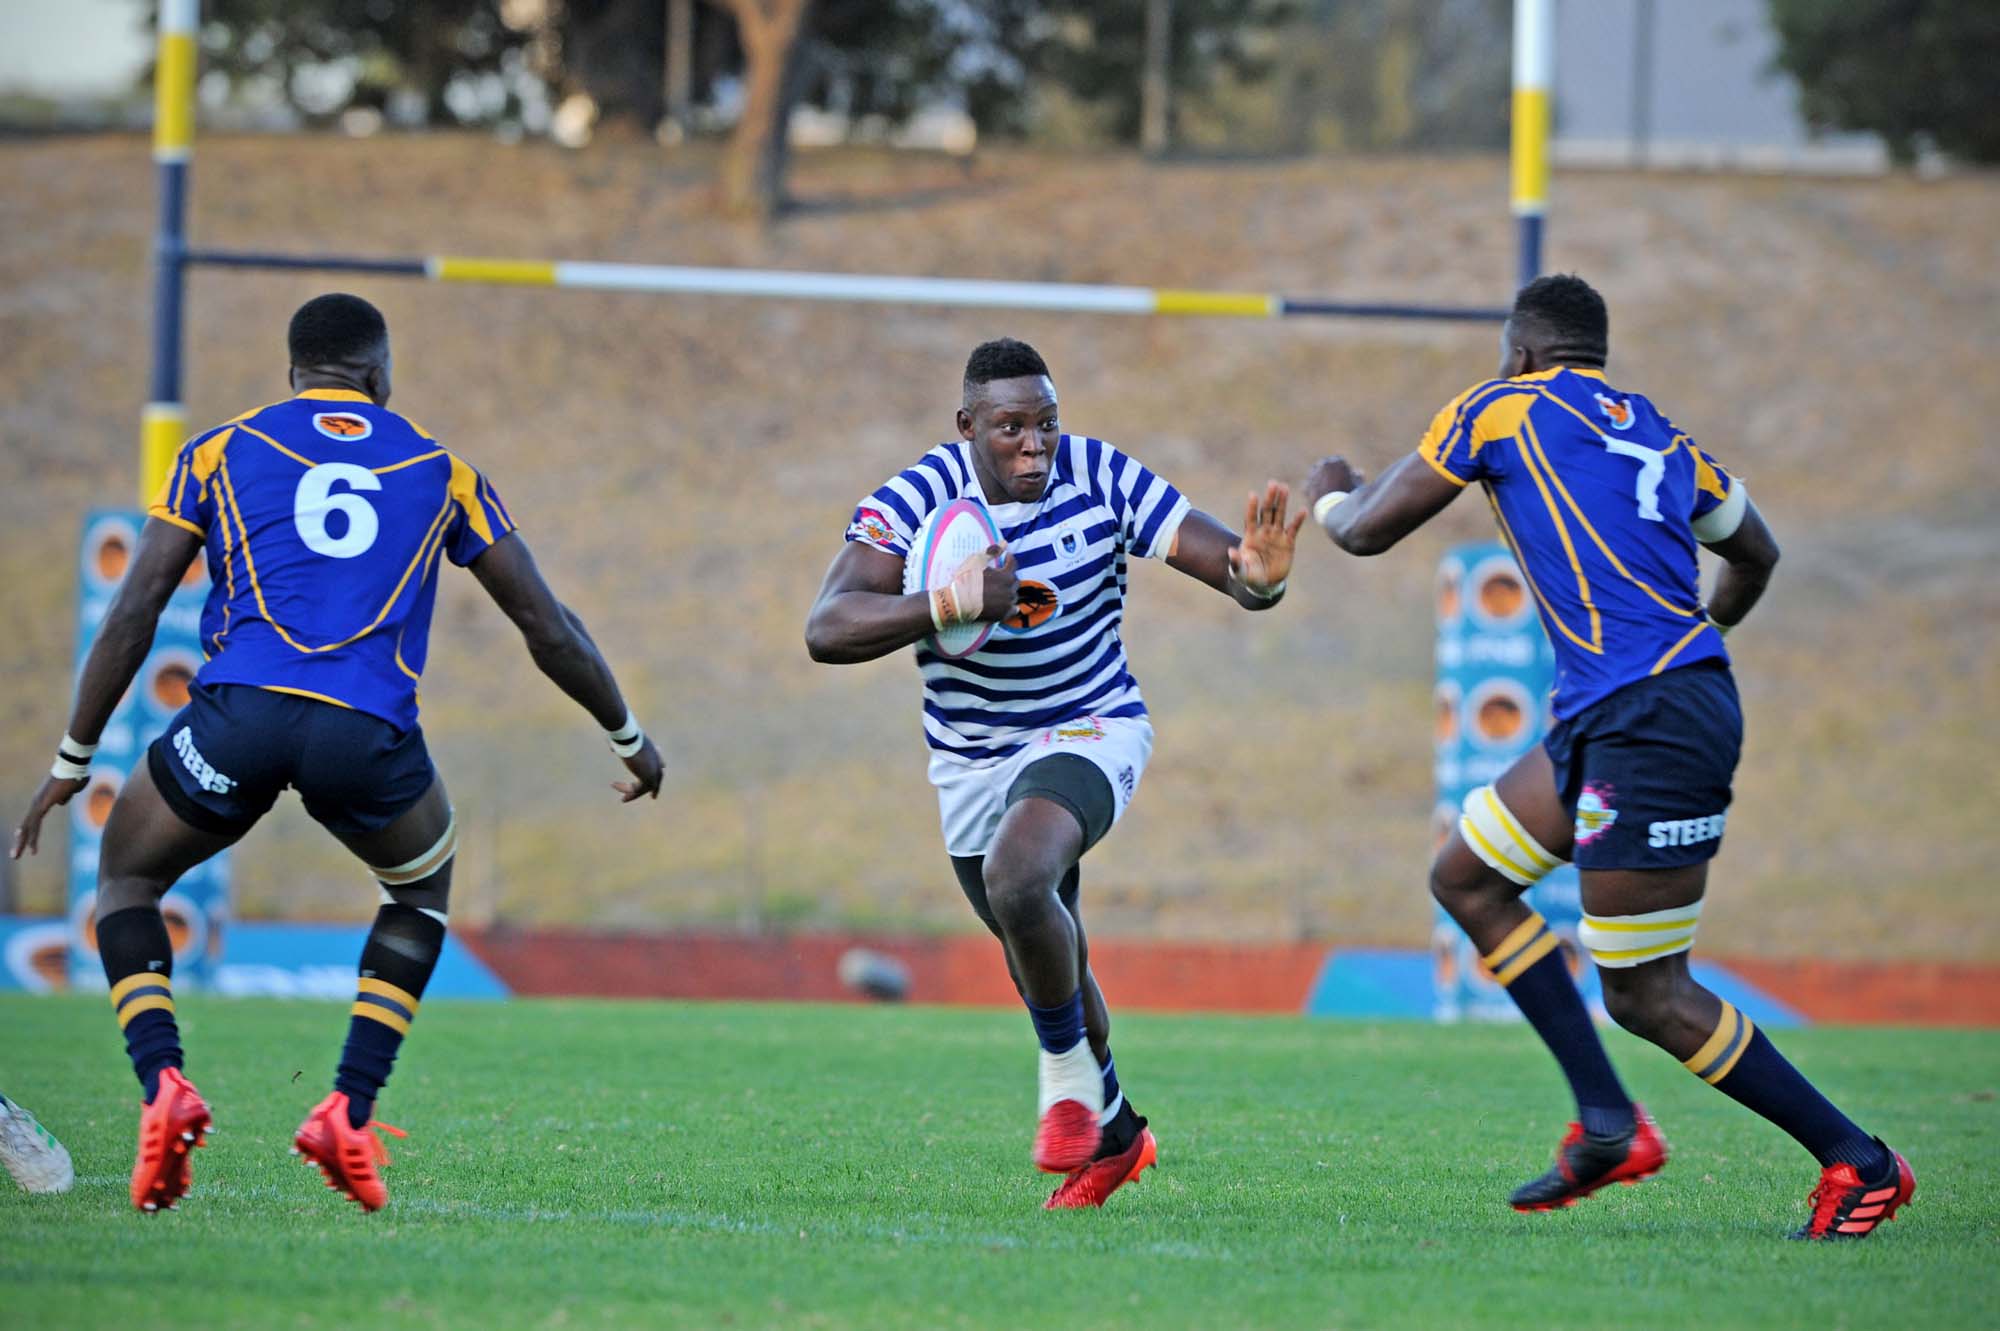 The Ikey Tigers won the intervarsity cup match against the University of the Western Cape on 18 February 2020.